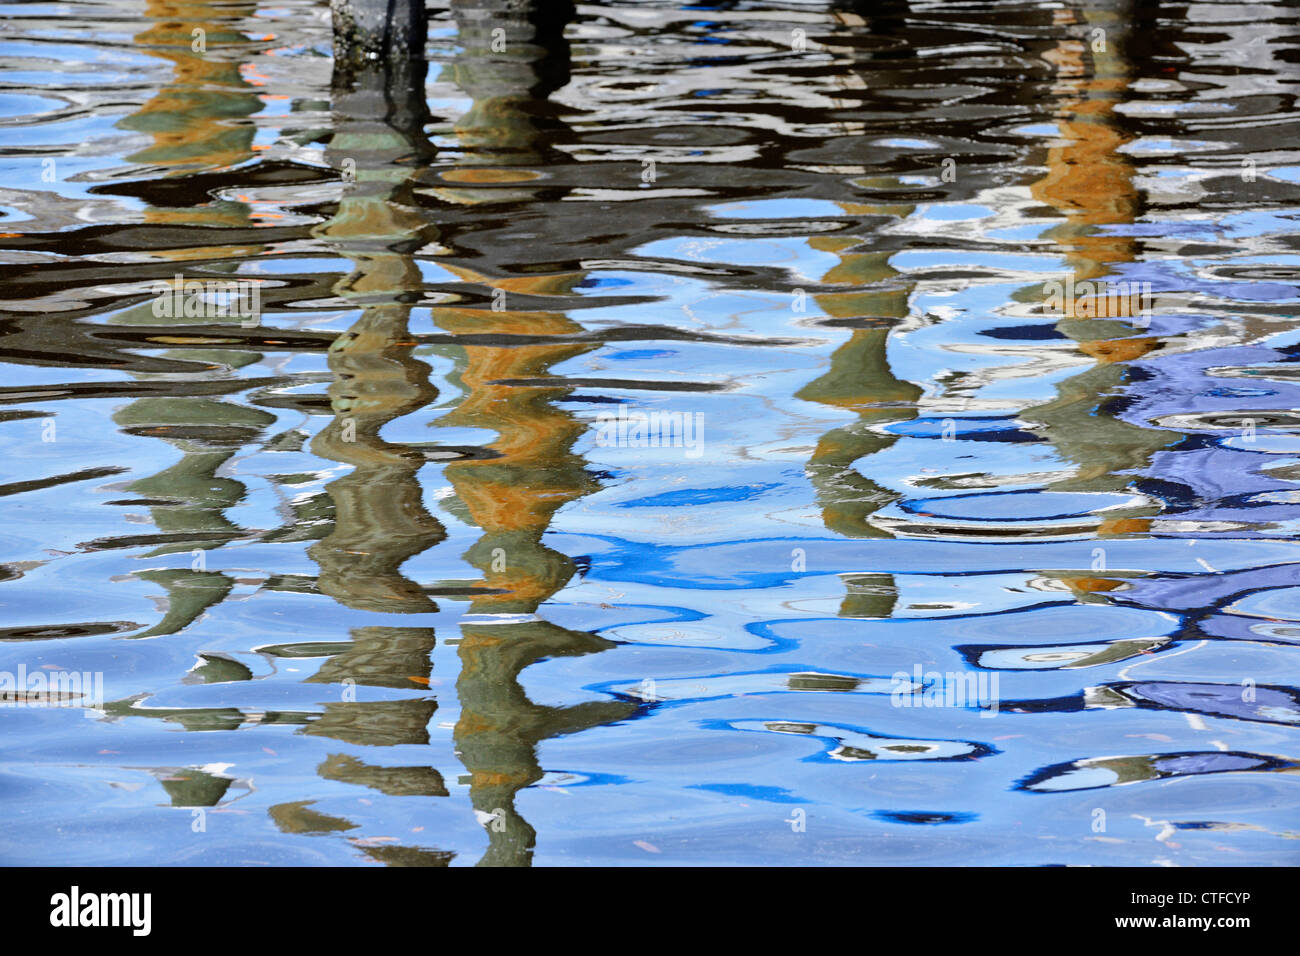 Reflections in the water at a marina, Venice, Florida, USA Stock Photo